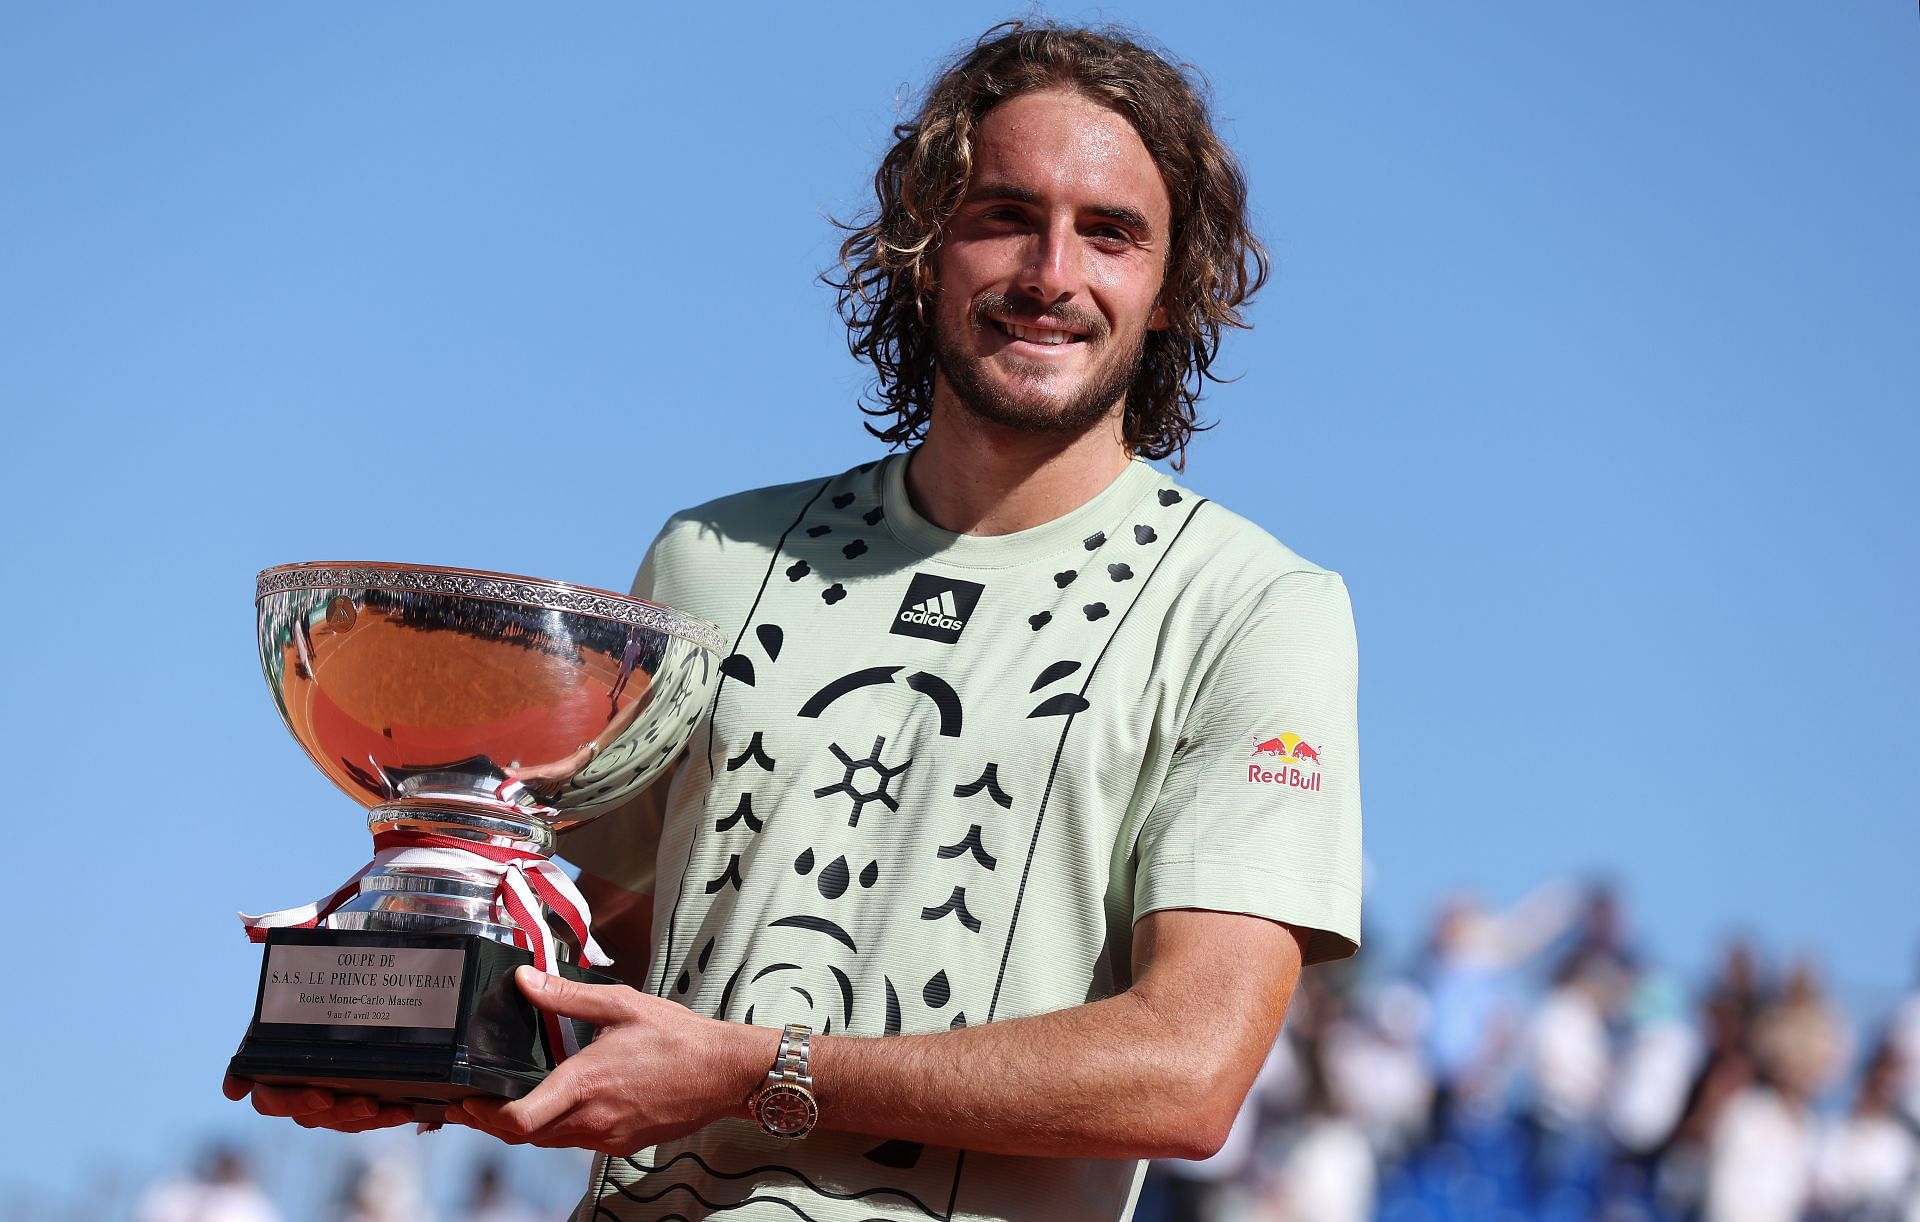 Stefanos Tsitsipas is the top seed at the Barcelona Open